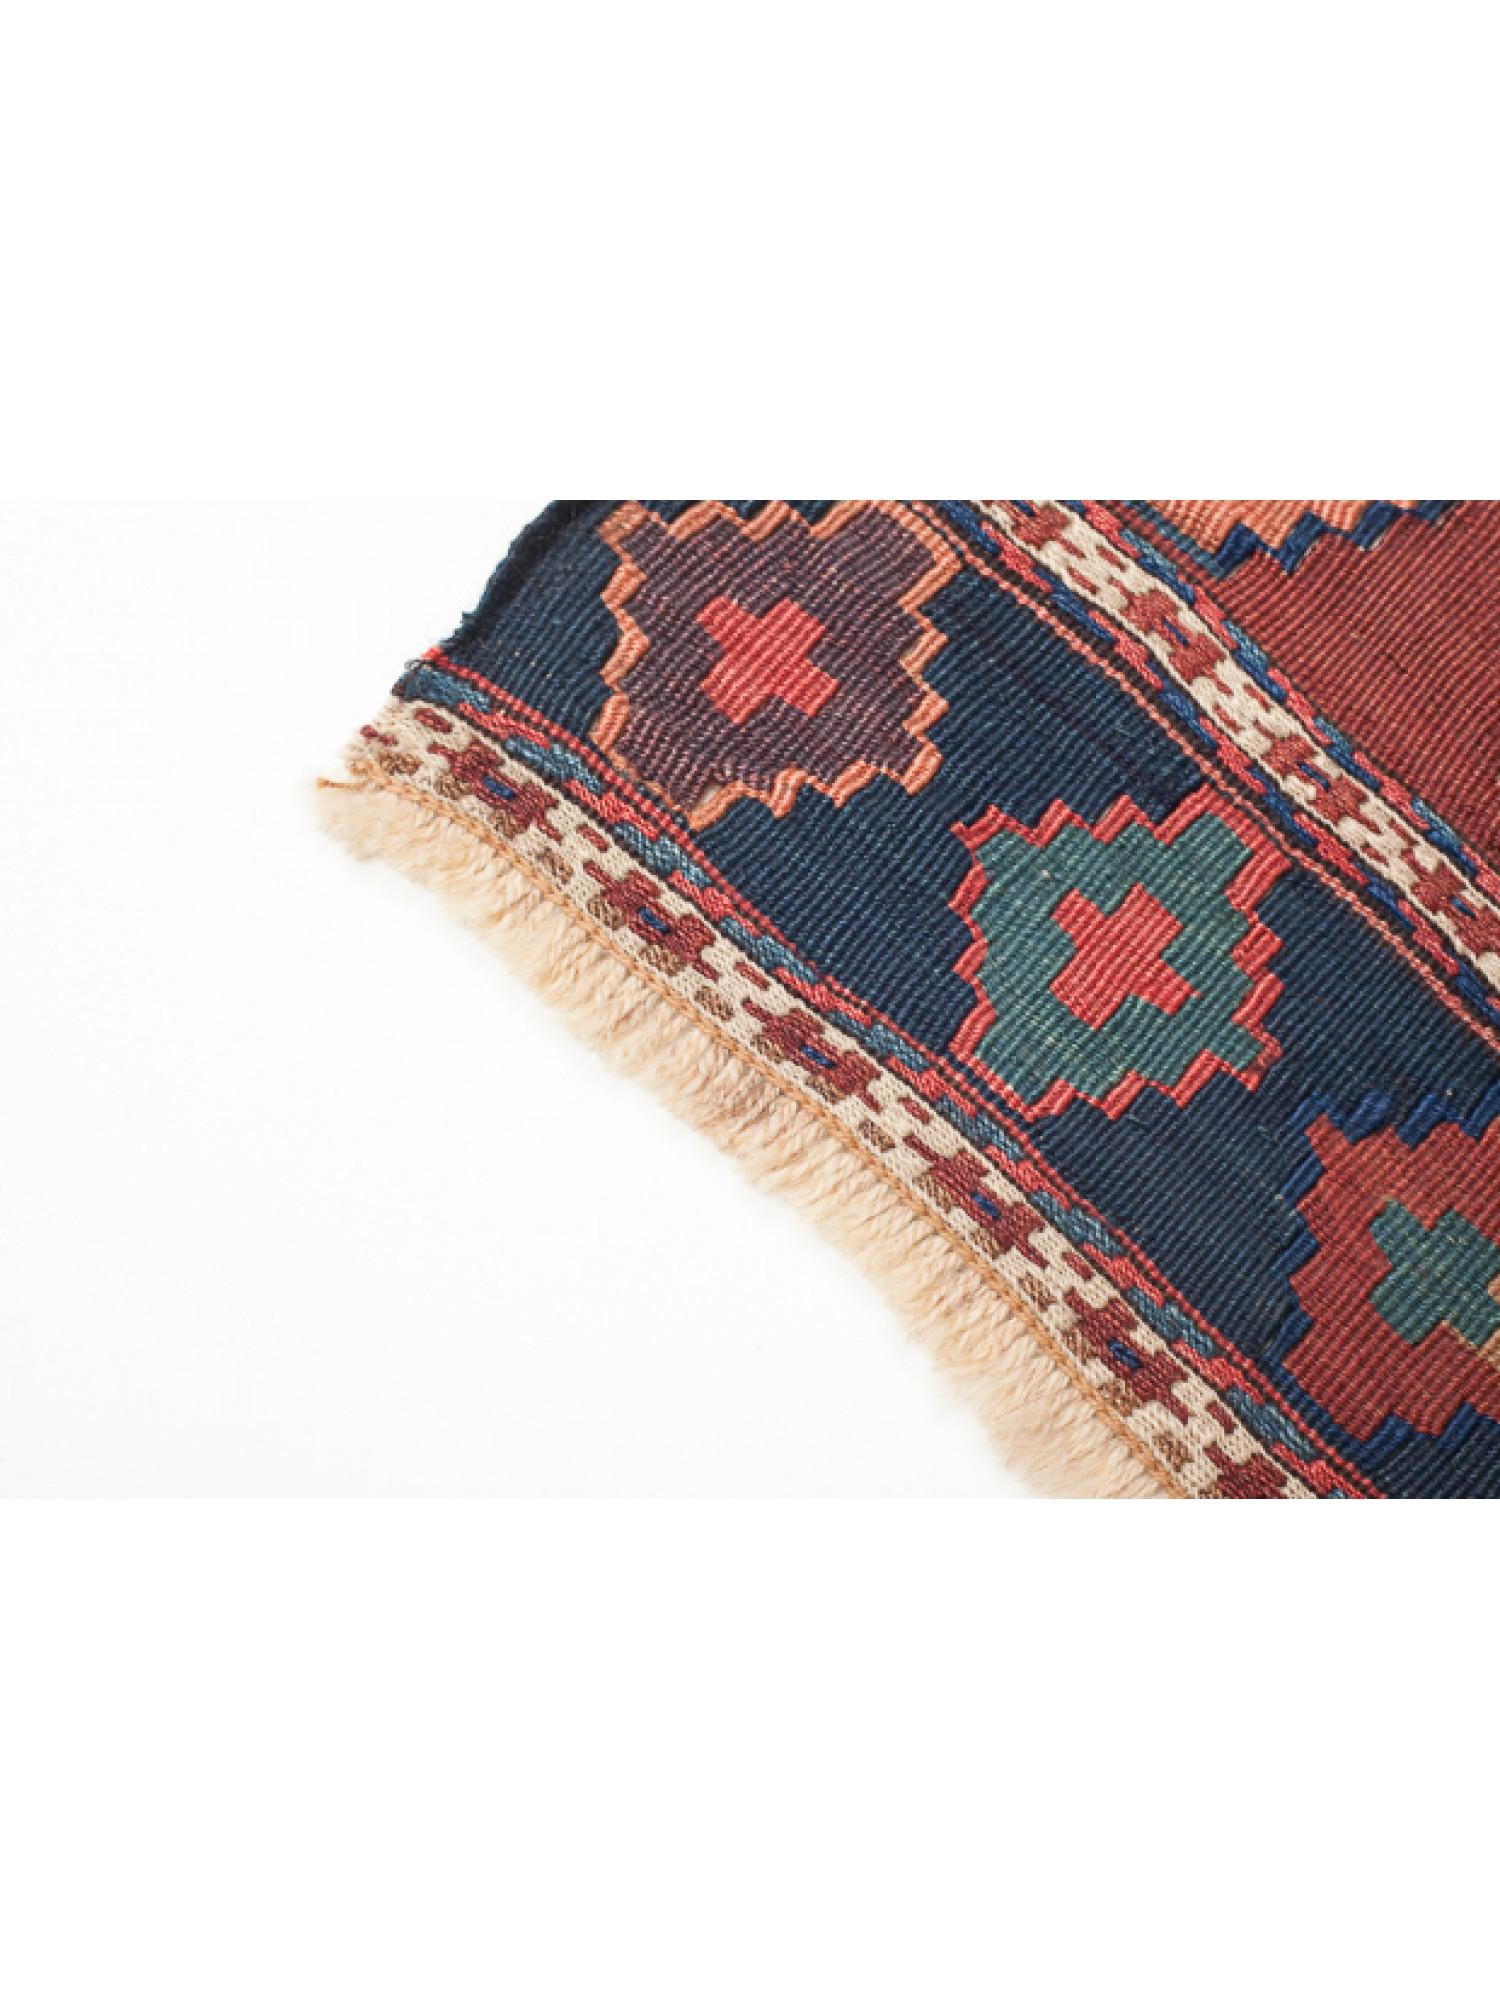 Hand-Knotted Antique Early 20th Century Caucasian Kilim Woven Cradle Part, Natural Dyed For Sale